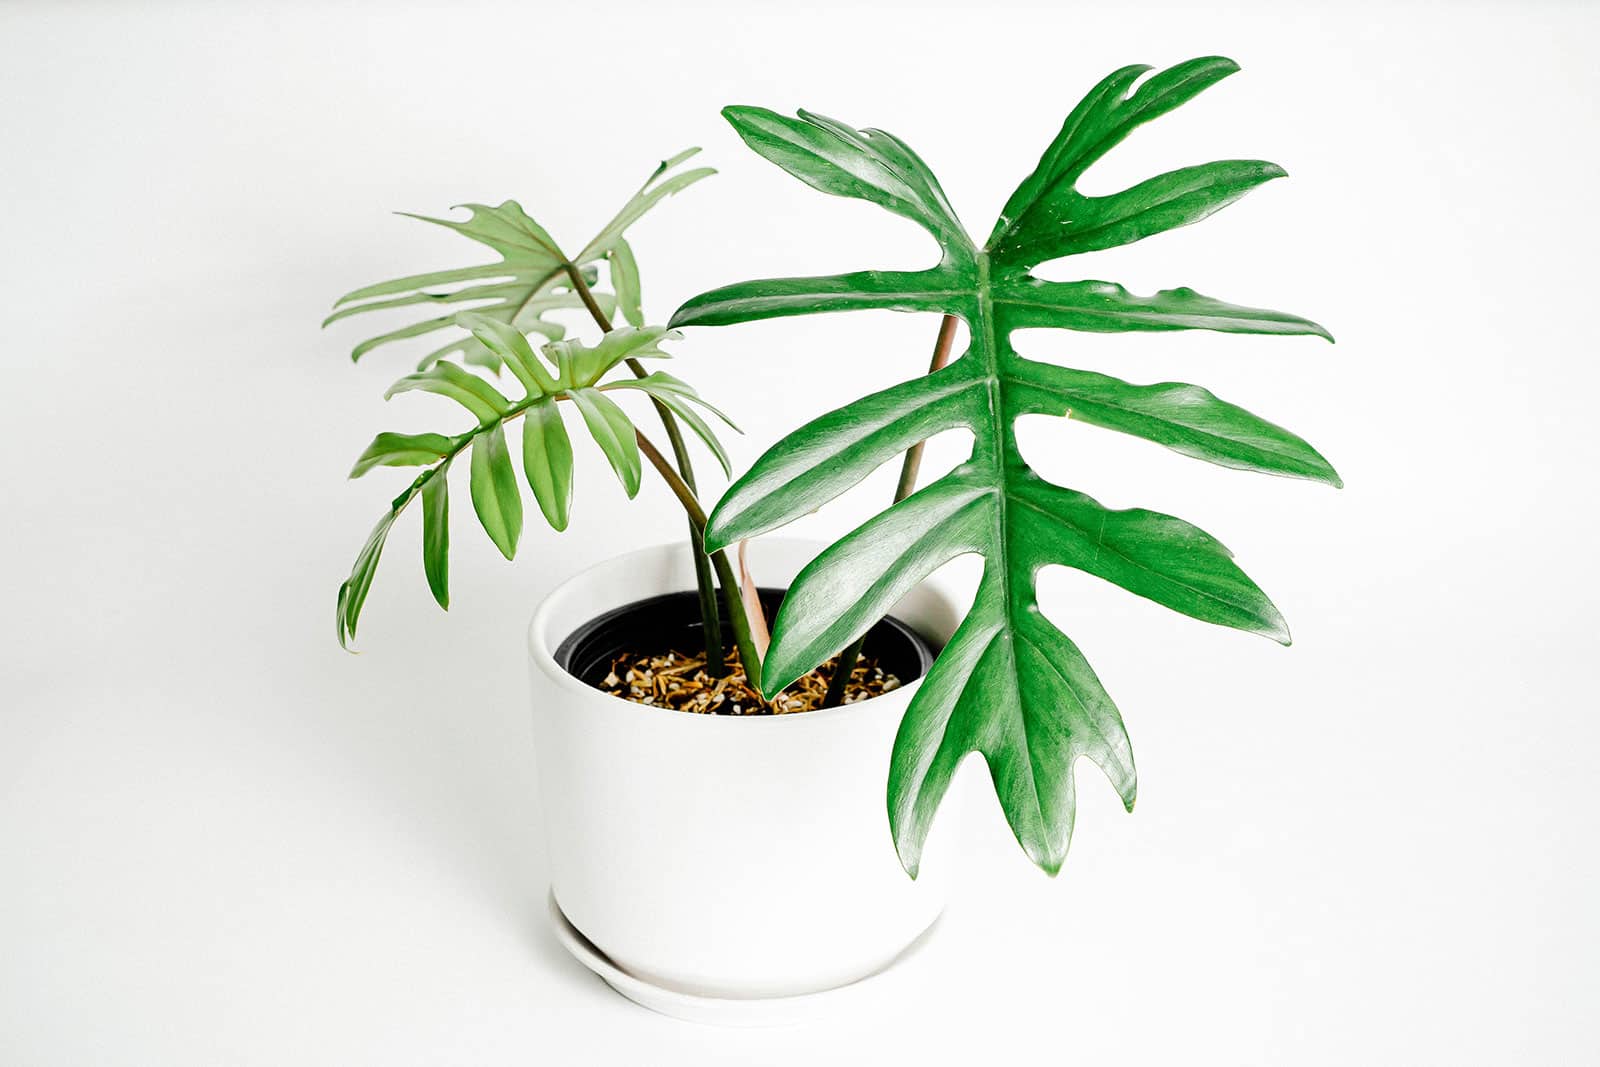 Minimalist shot of a small Philodendron mayoi houseplant in a white pot against a white background